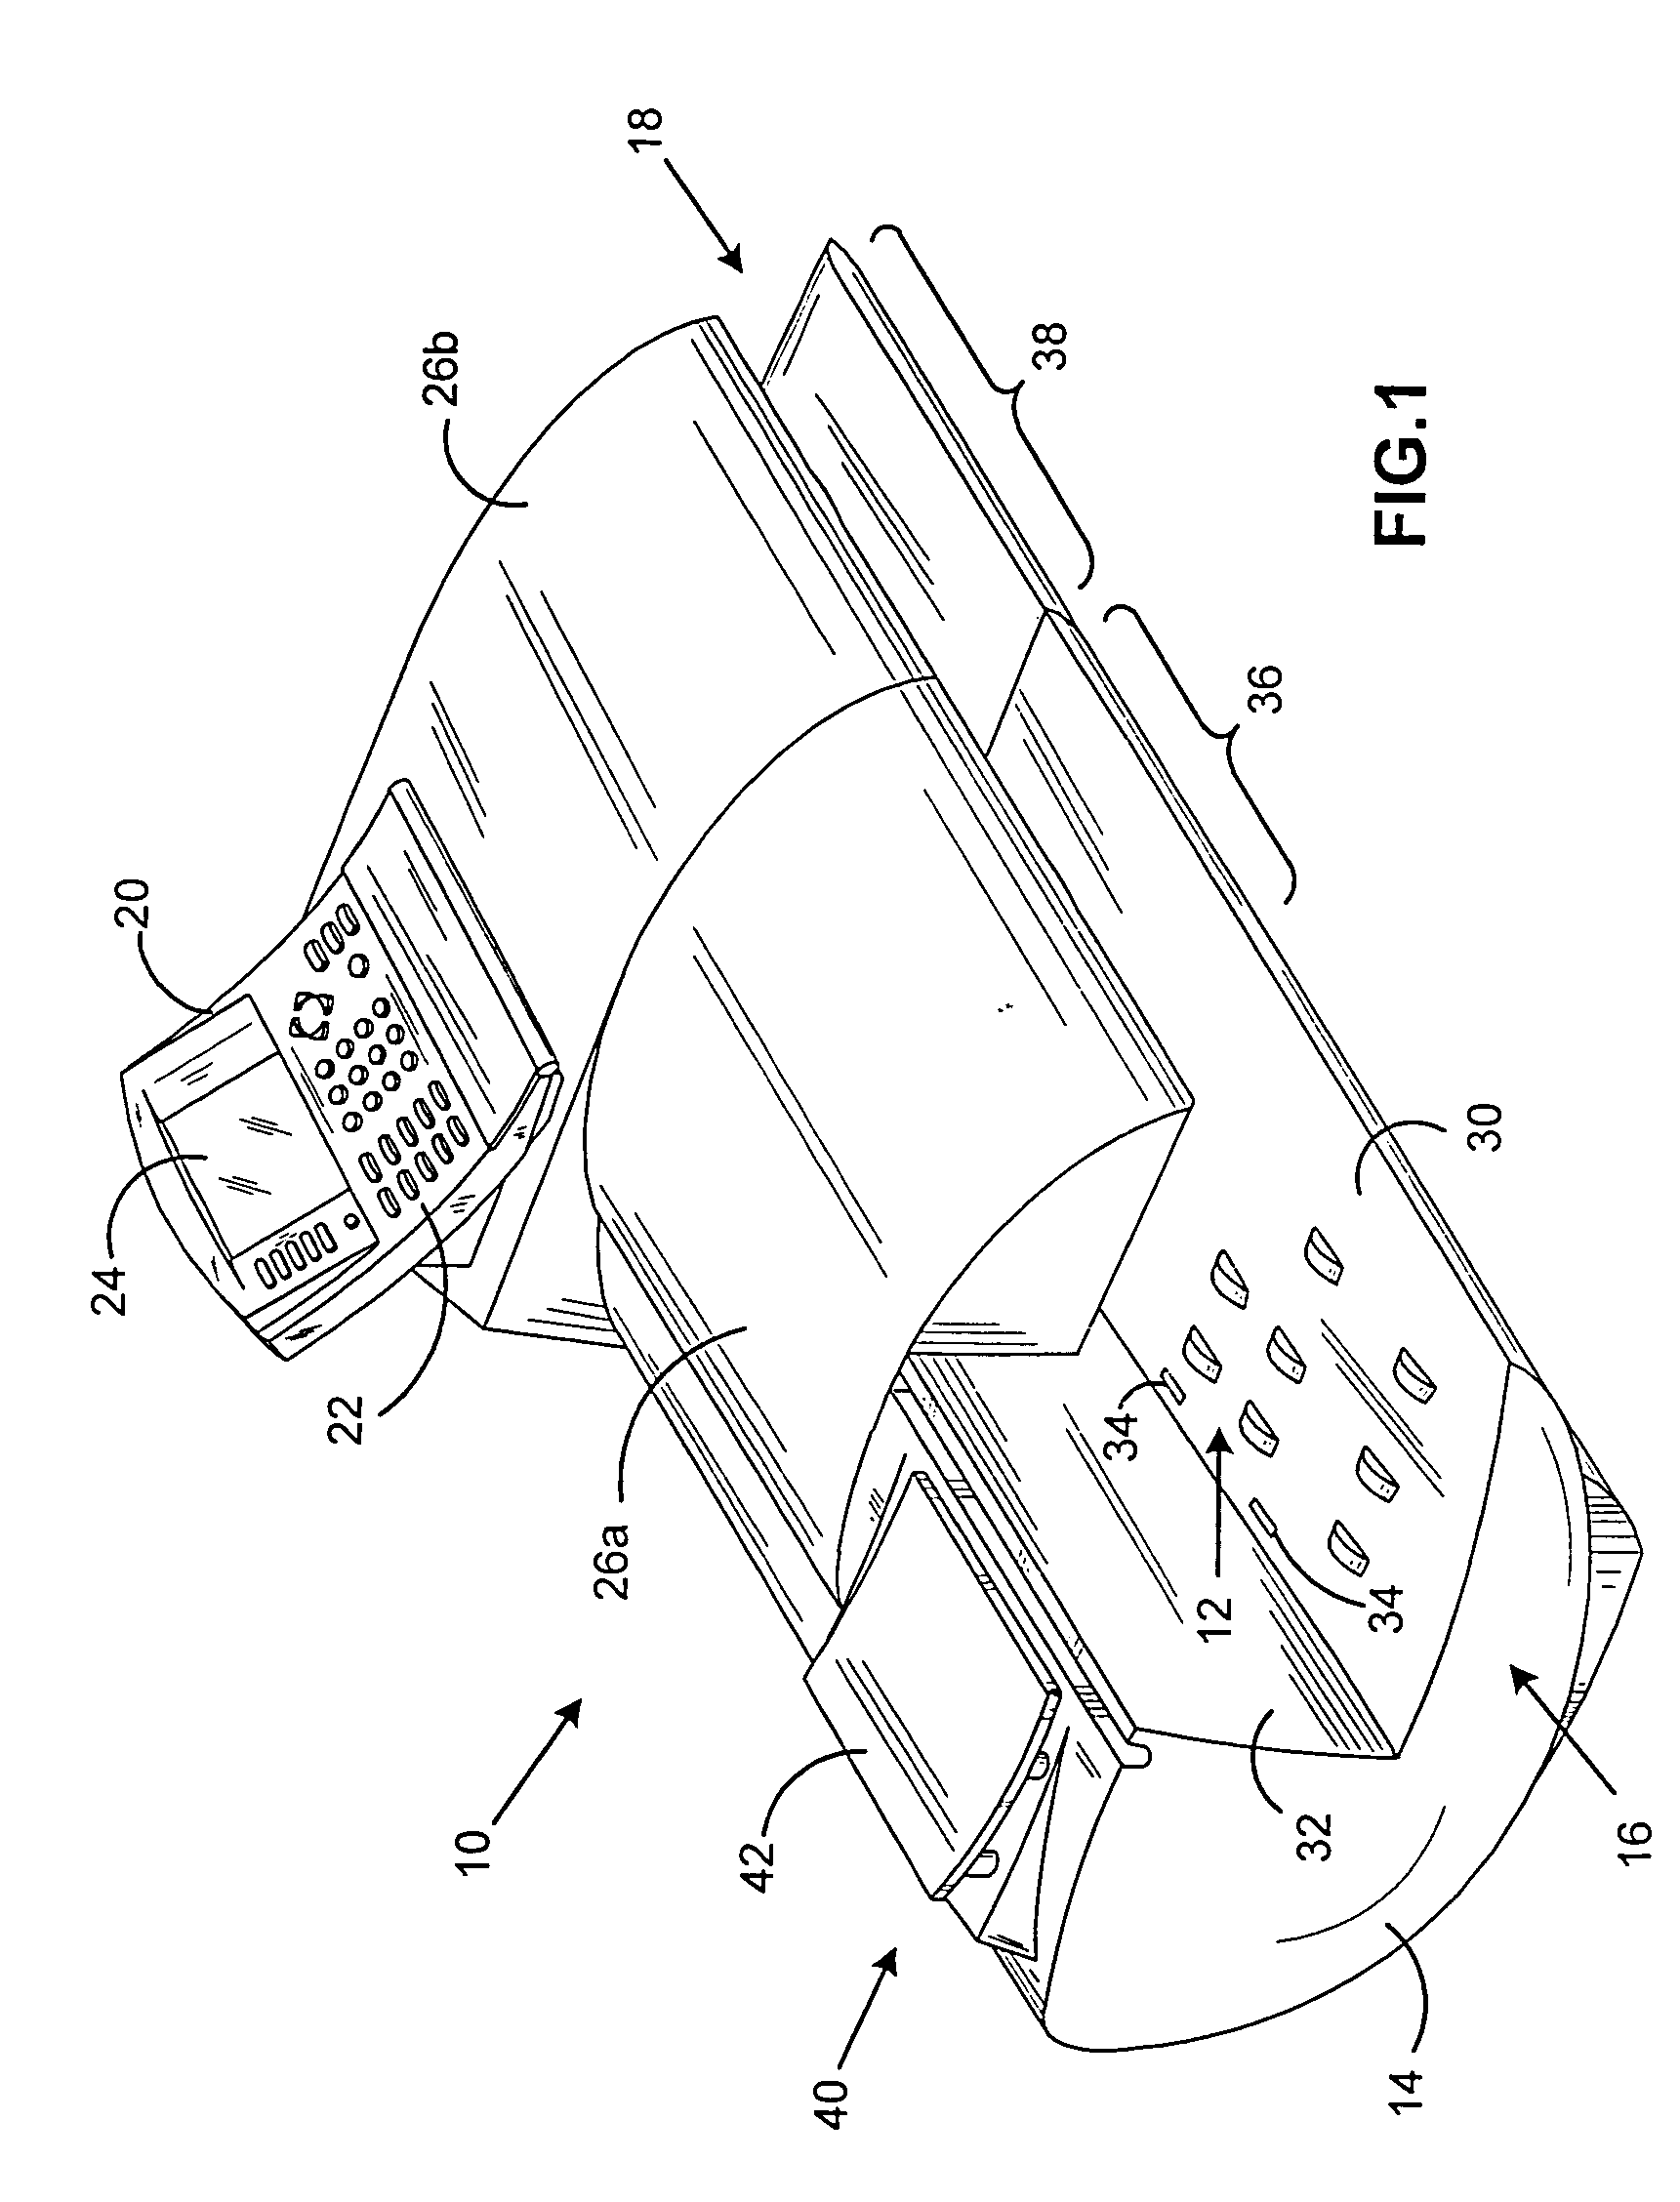 Mailing machine including methods and systems to reduce weighing errors when operating in a differential weighing mode